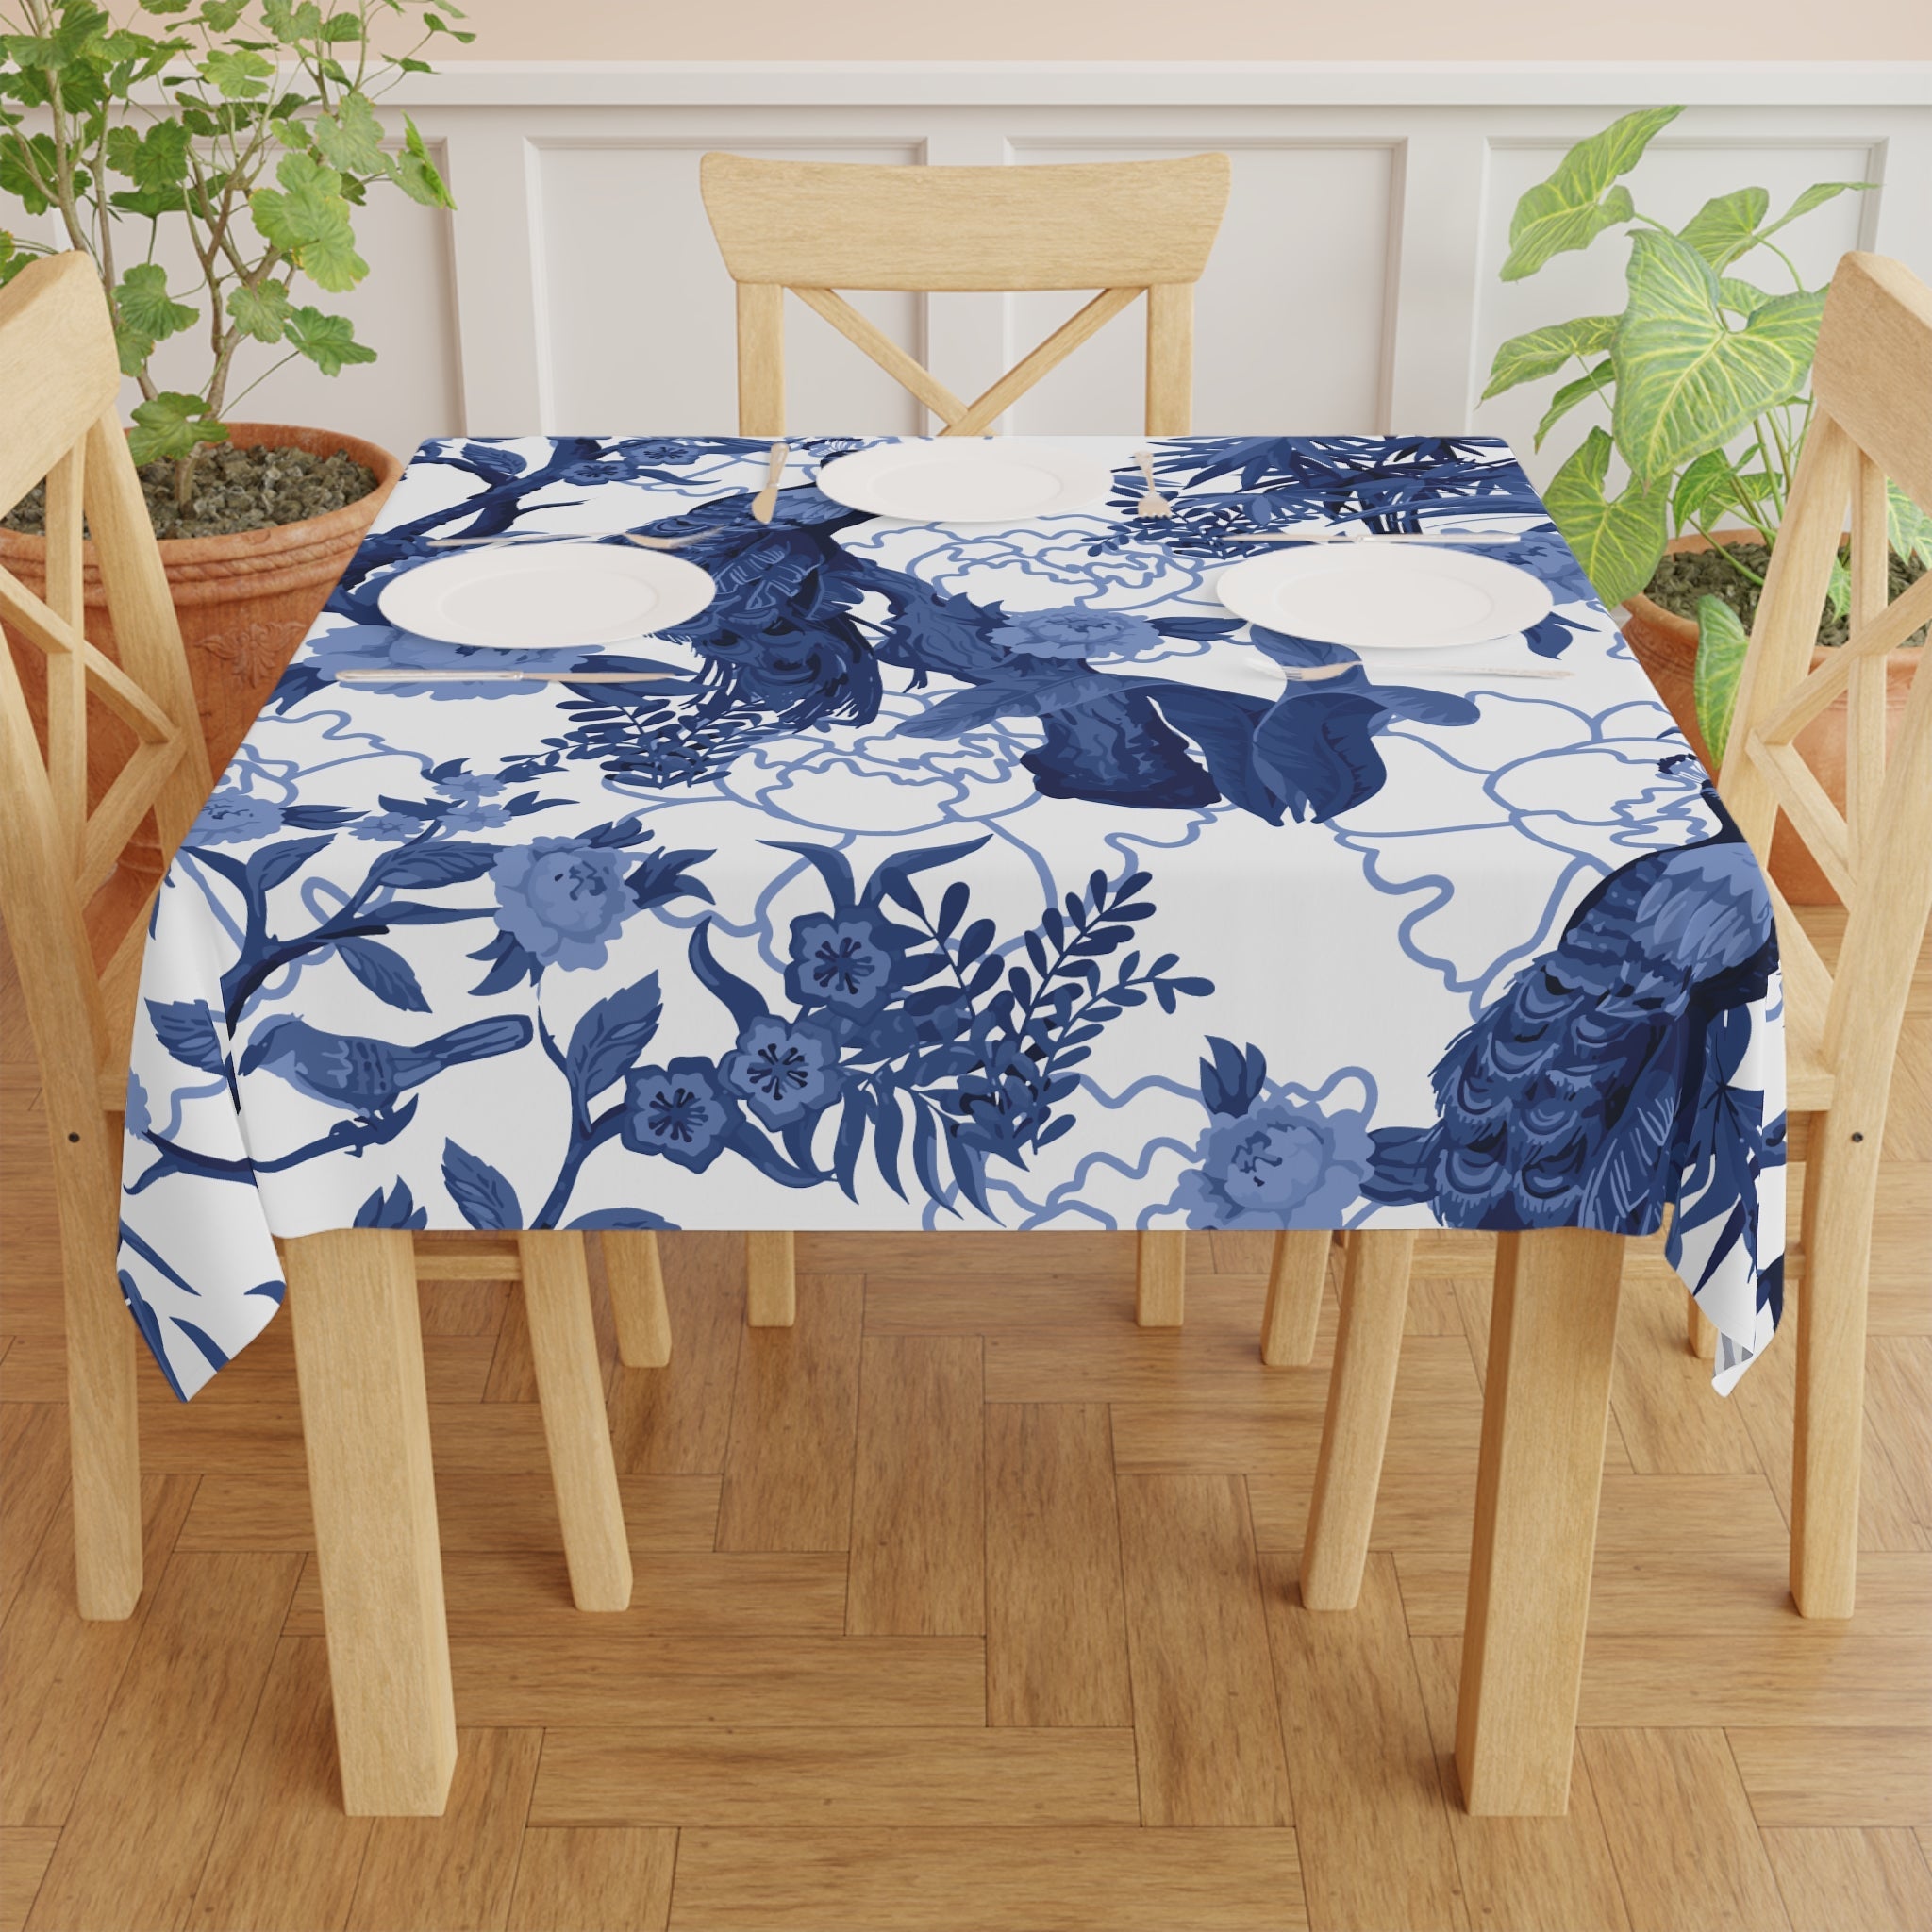 Kate McEnroe New York Chinoiserie Blue Peacock Tablecloth, Elegant Floral Dining Room DecorTablecloths14634653652890694589